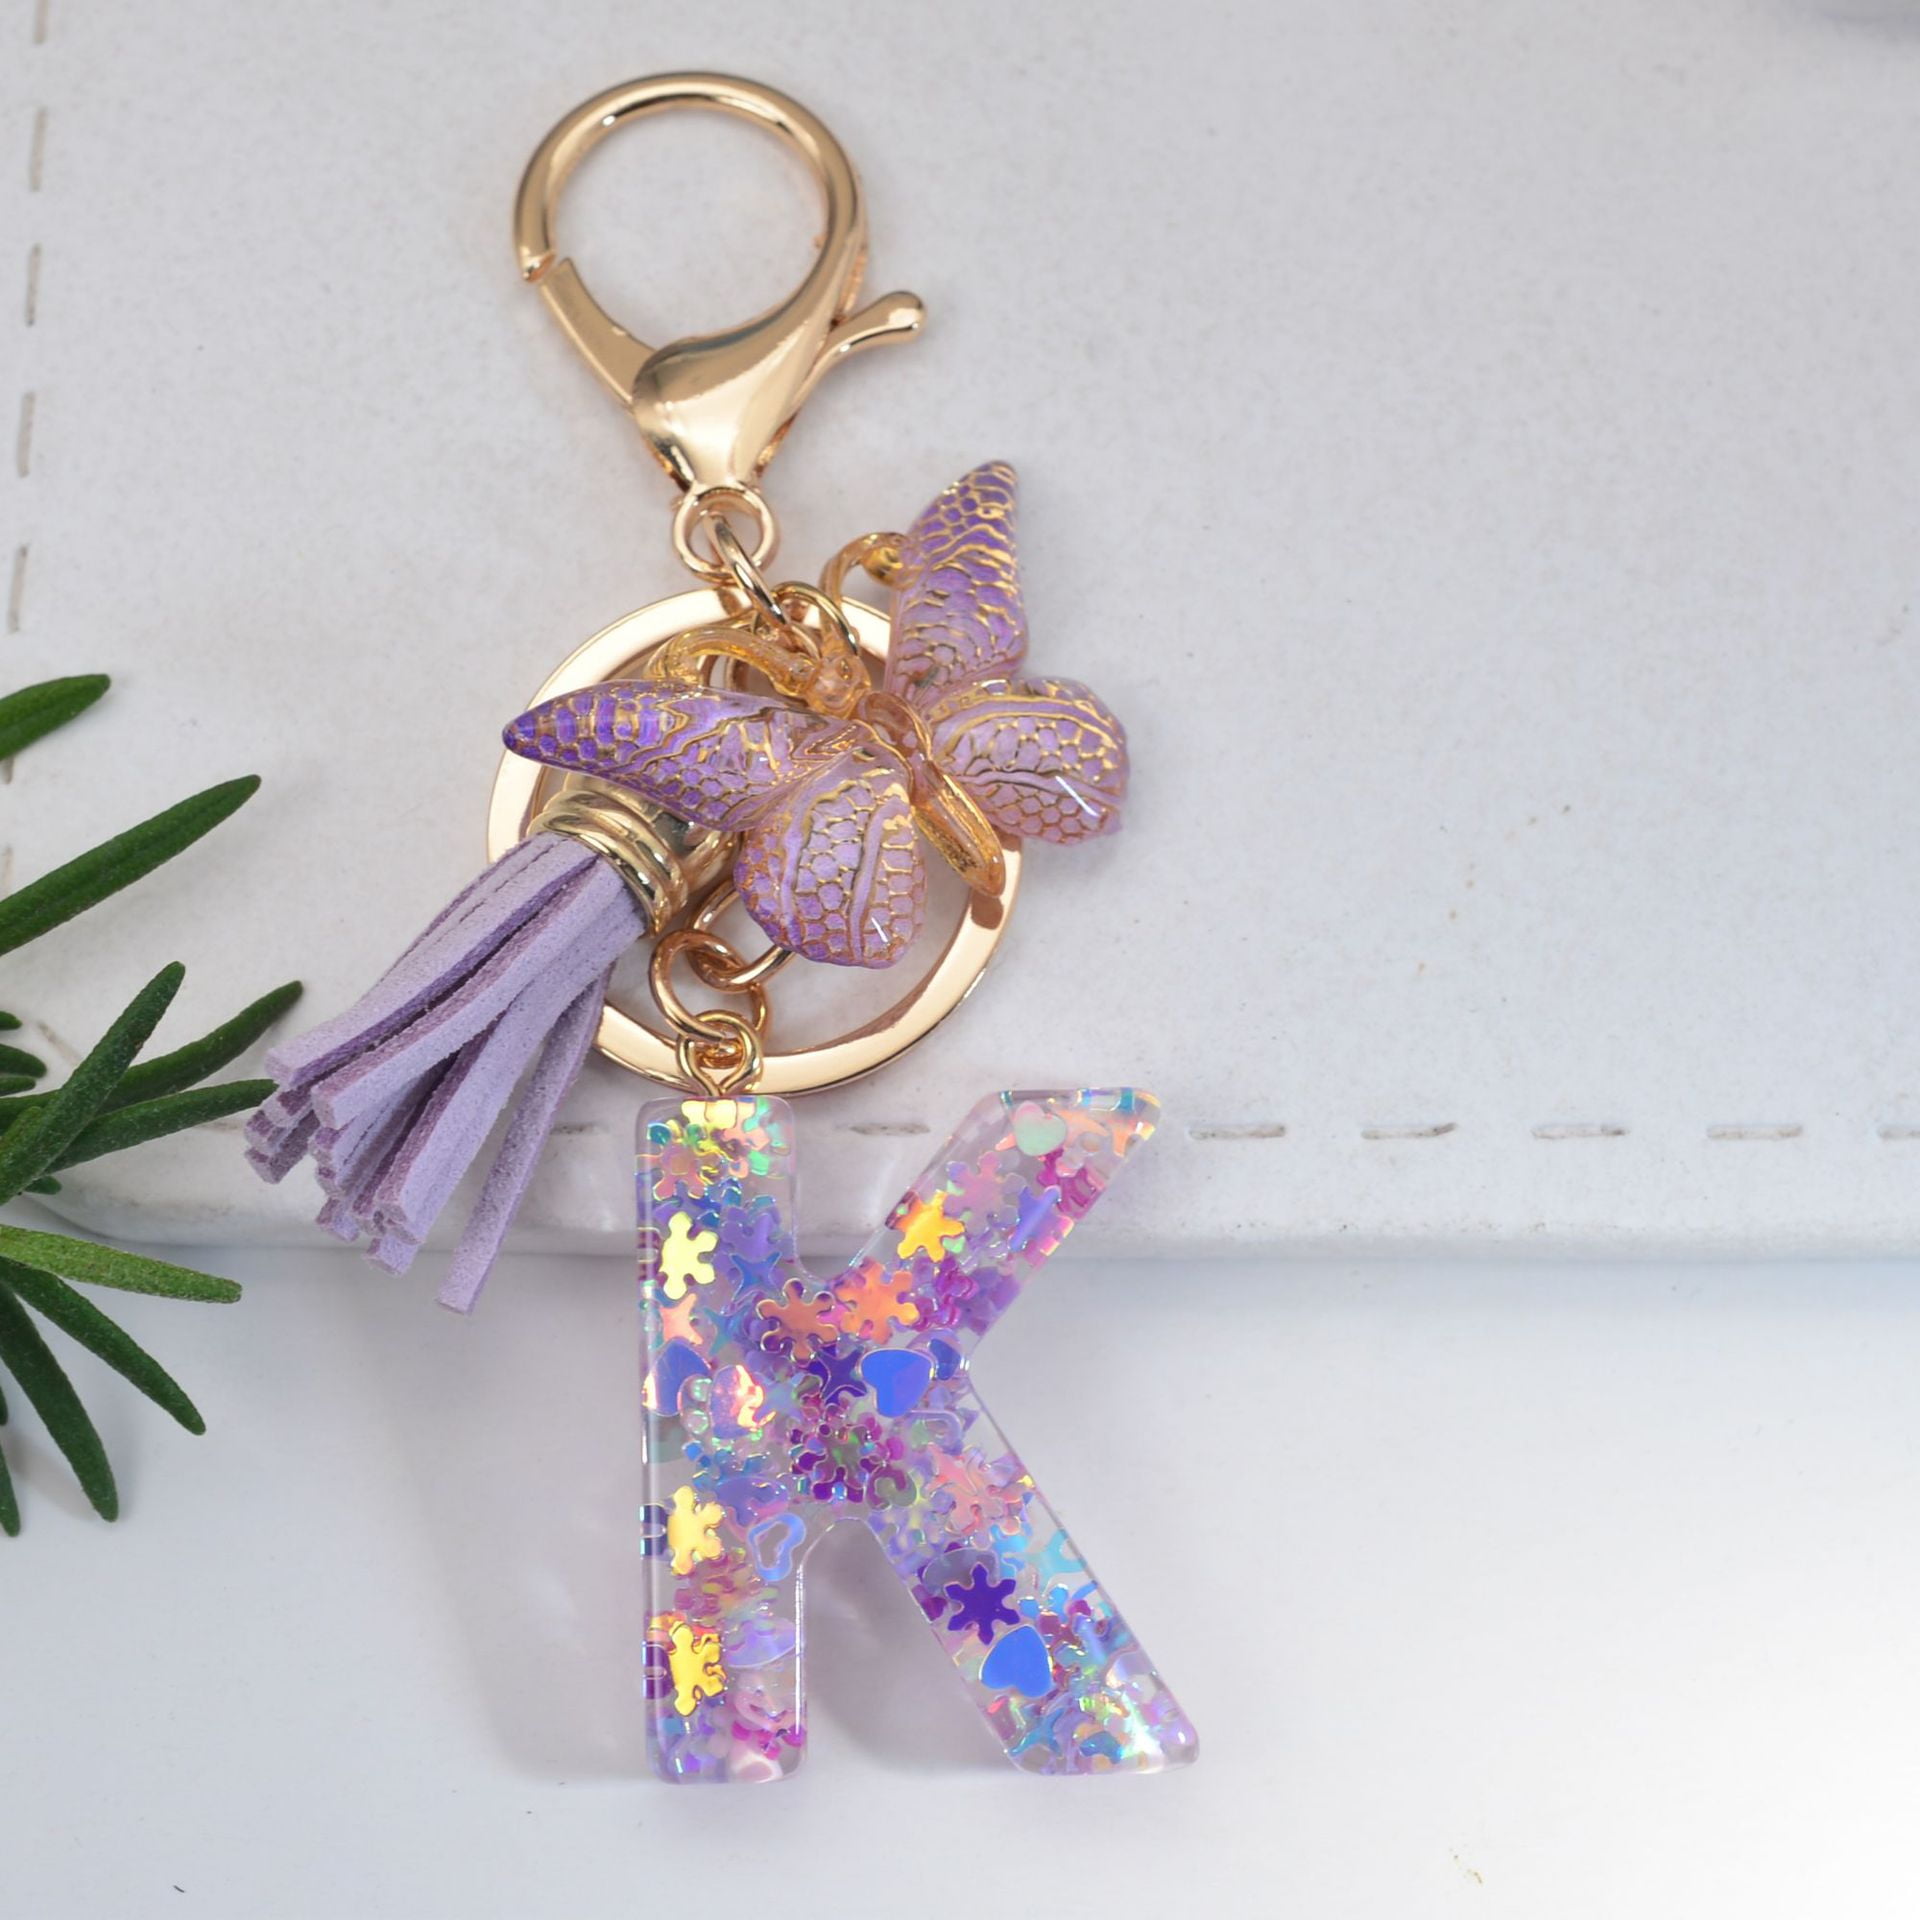 Purple 'Electro' Letter Keychain - A Cool Accessory for Bag & Keys